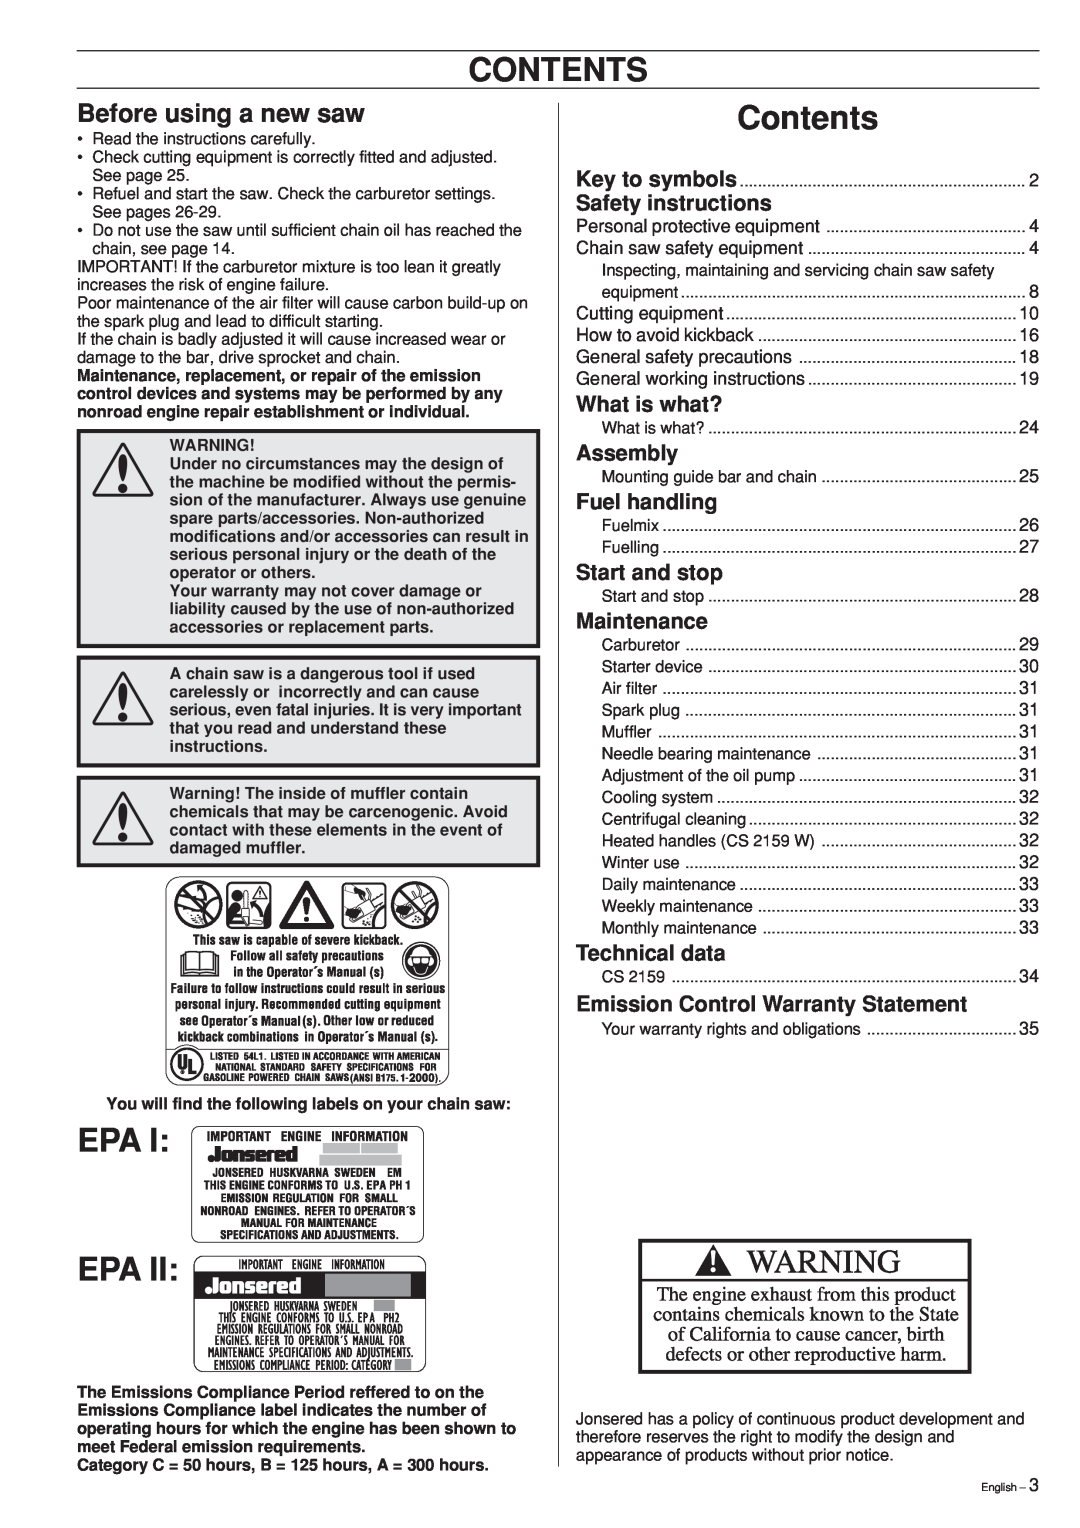 Jonsered cs 2159 Contents, Epa Epa, Before using a new saw, Safety instructions, What is what?, Assembly, Fuel handling 